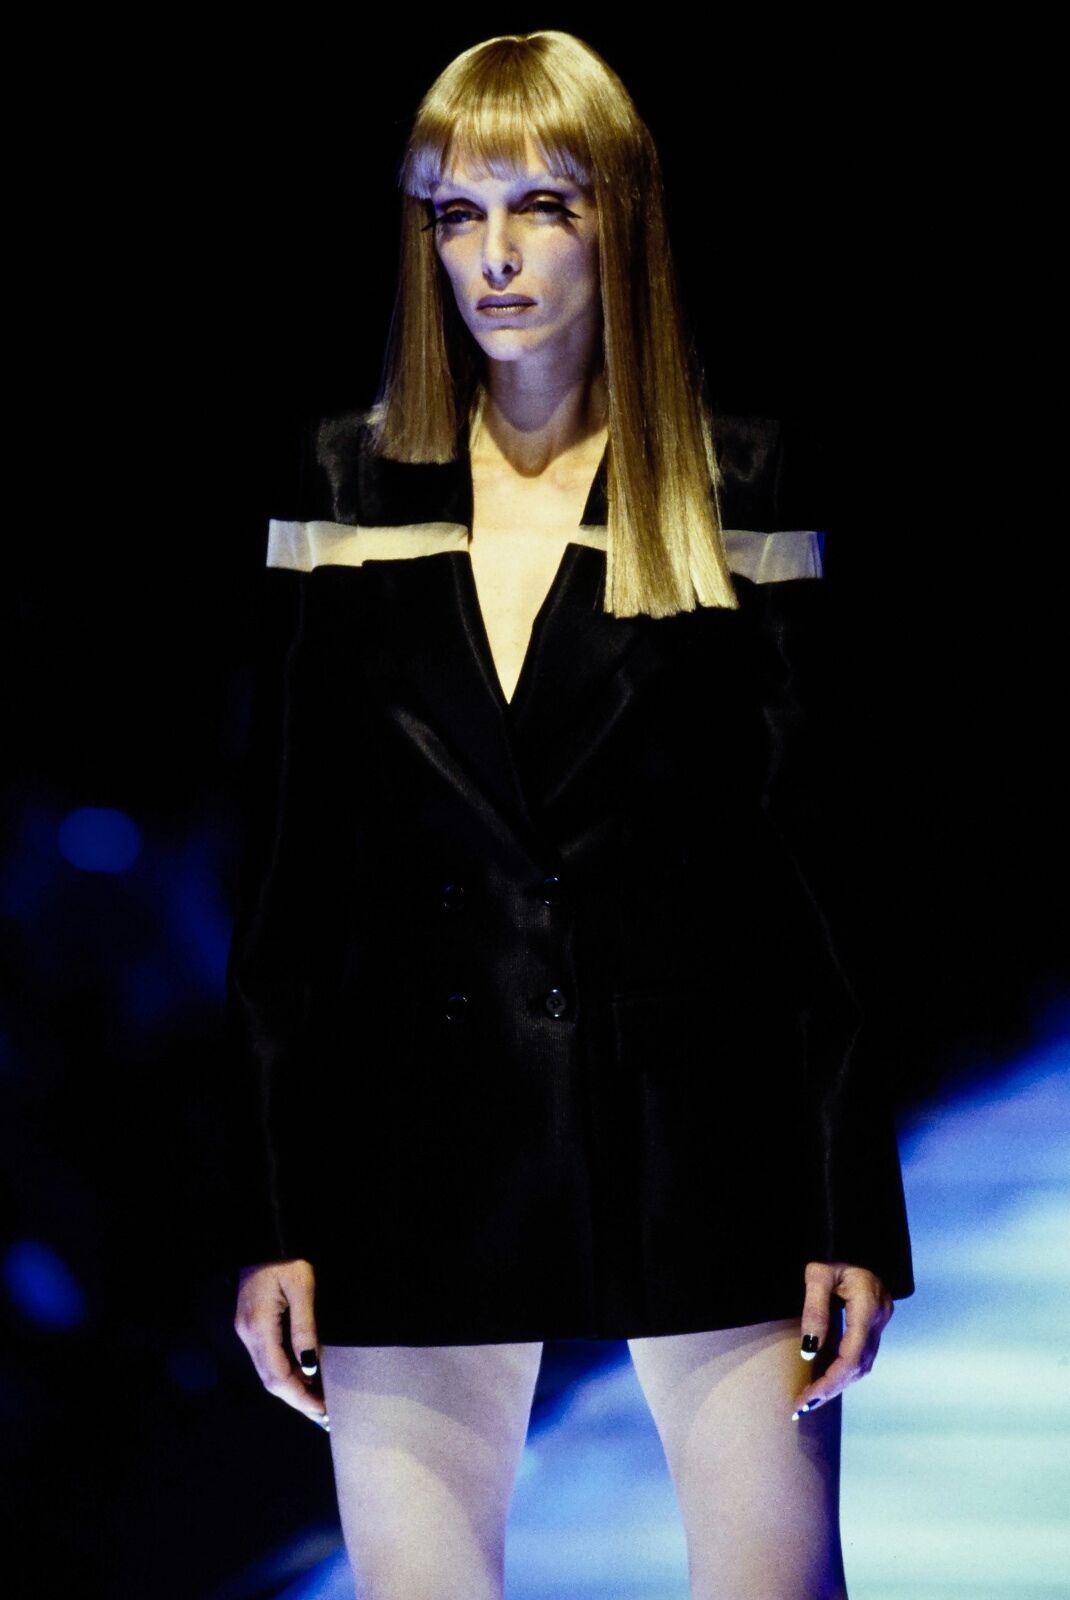 ALEXANDER MCQUEEN
From the Spring Summer 1998 'Golden Shower' Collection
Rare set completed with matching pinstripe trousers and blazer. Worn as a mini dress on runway.
Jacket: Wool, polyester, nylon, elastic. 
Black base with yellow pinstripe.